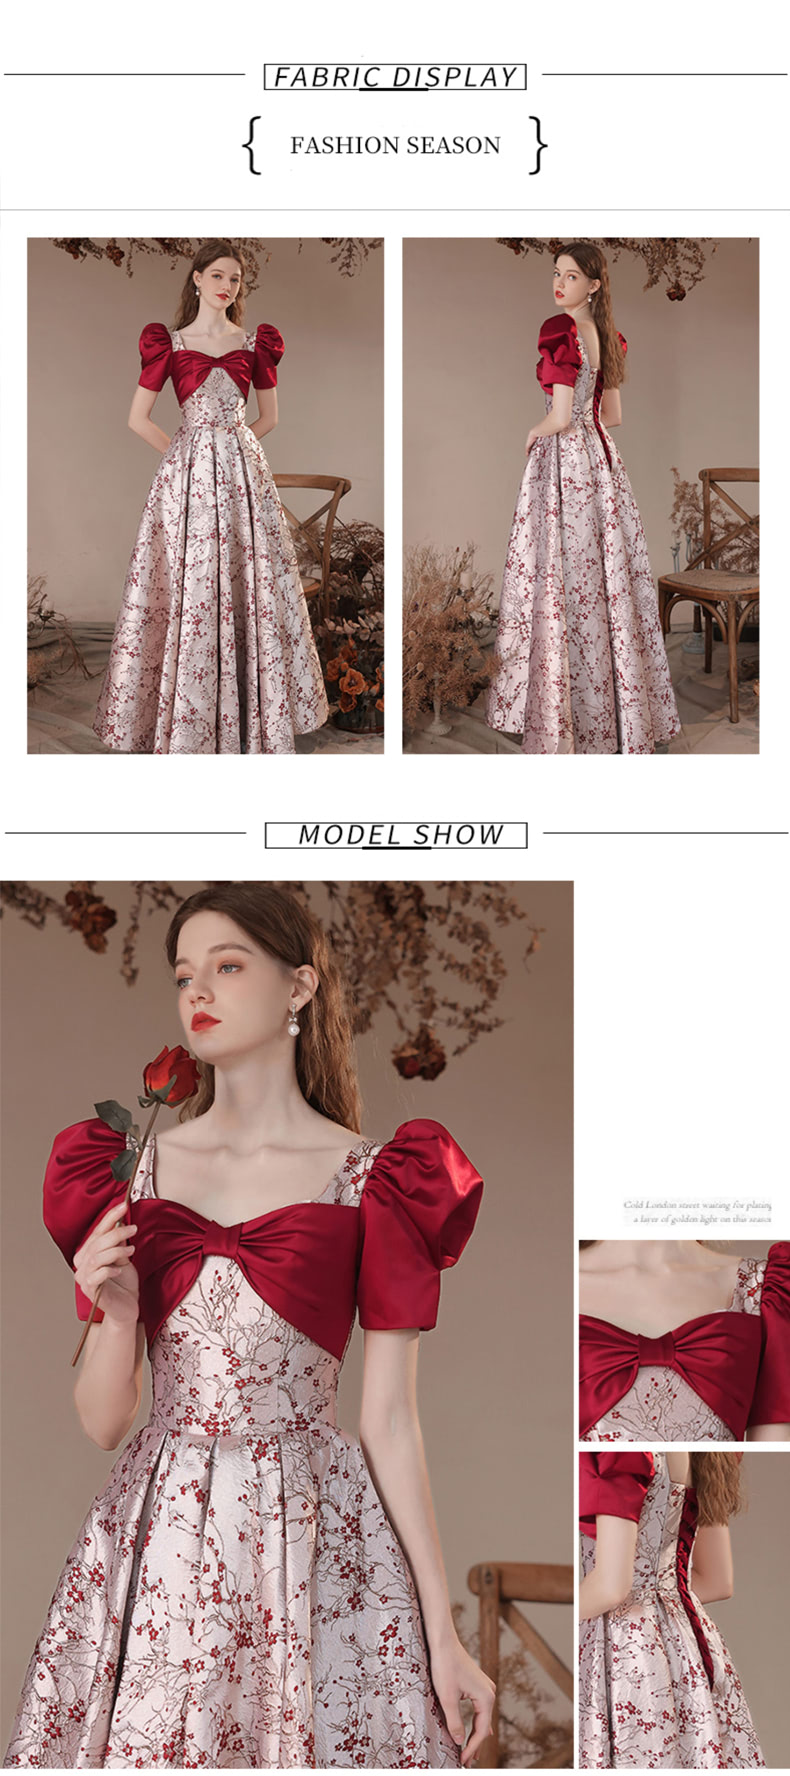 Sweet-Short-Sleeve-Floral-Printed-Banquet-Toast-Prom-Evening-Dress12